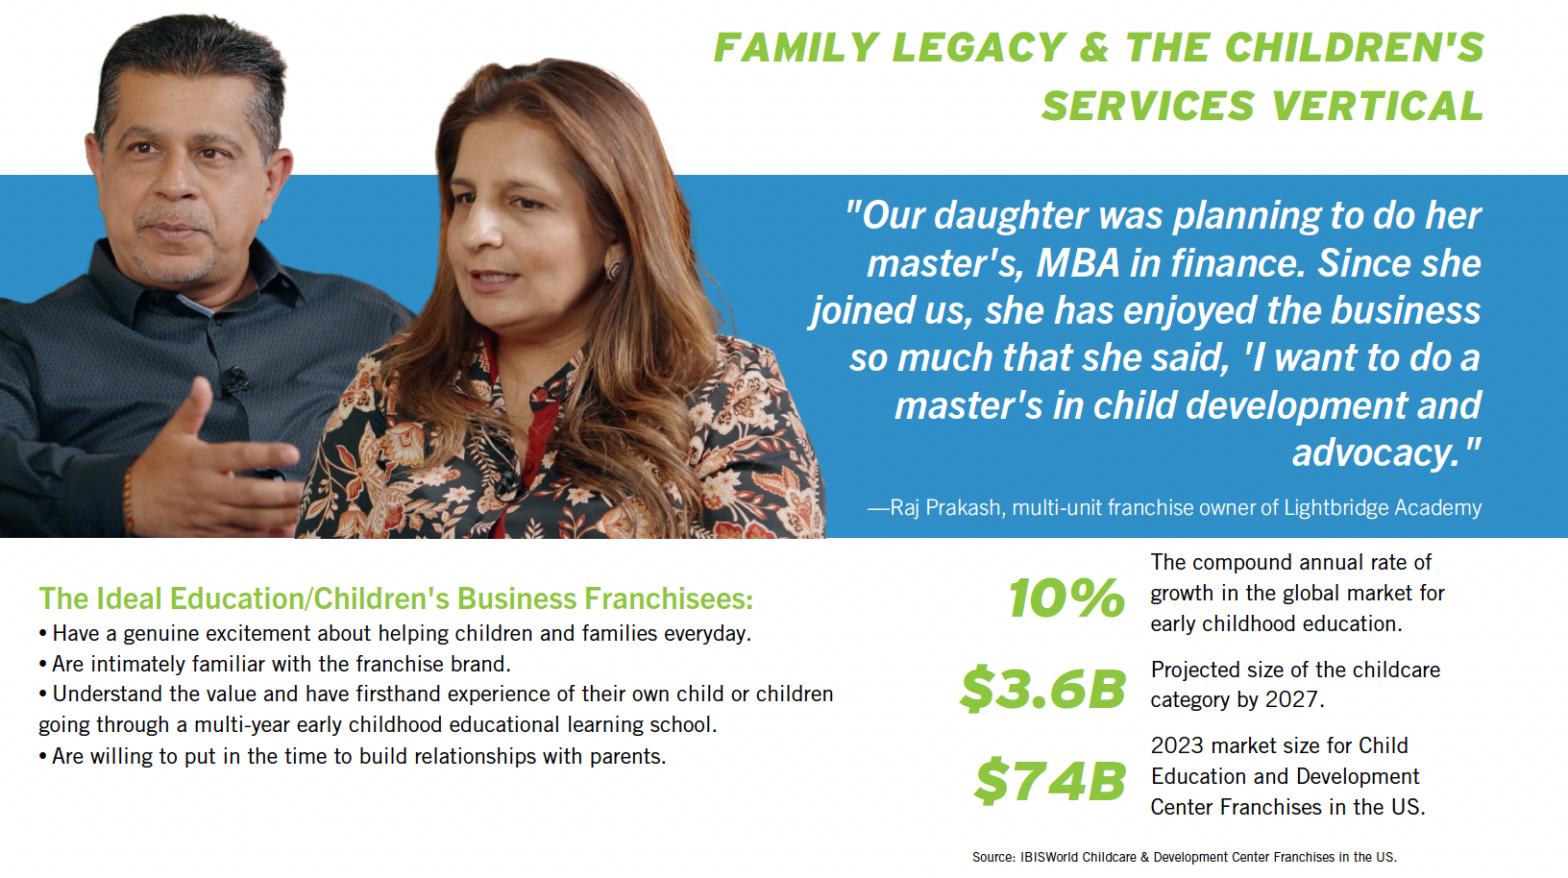 Creating a Family Legacy through Multi-Unit Franchising